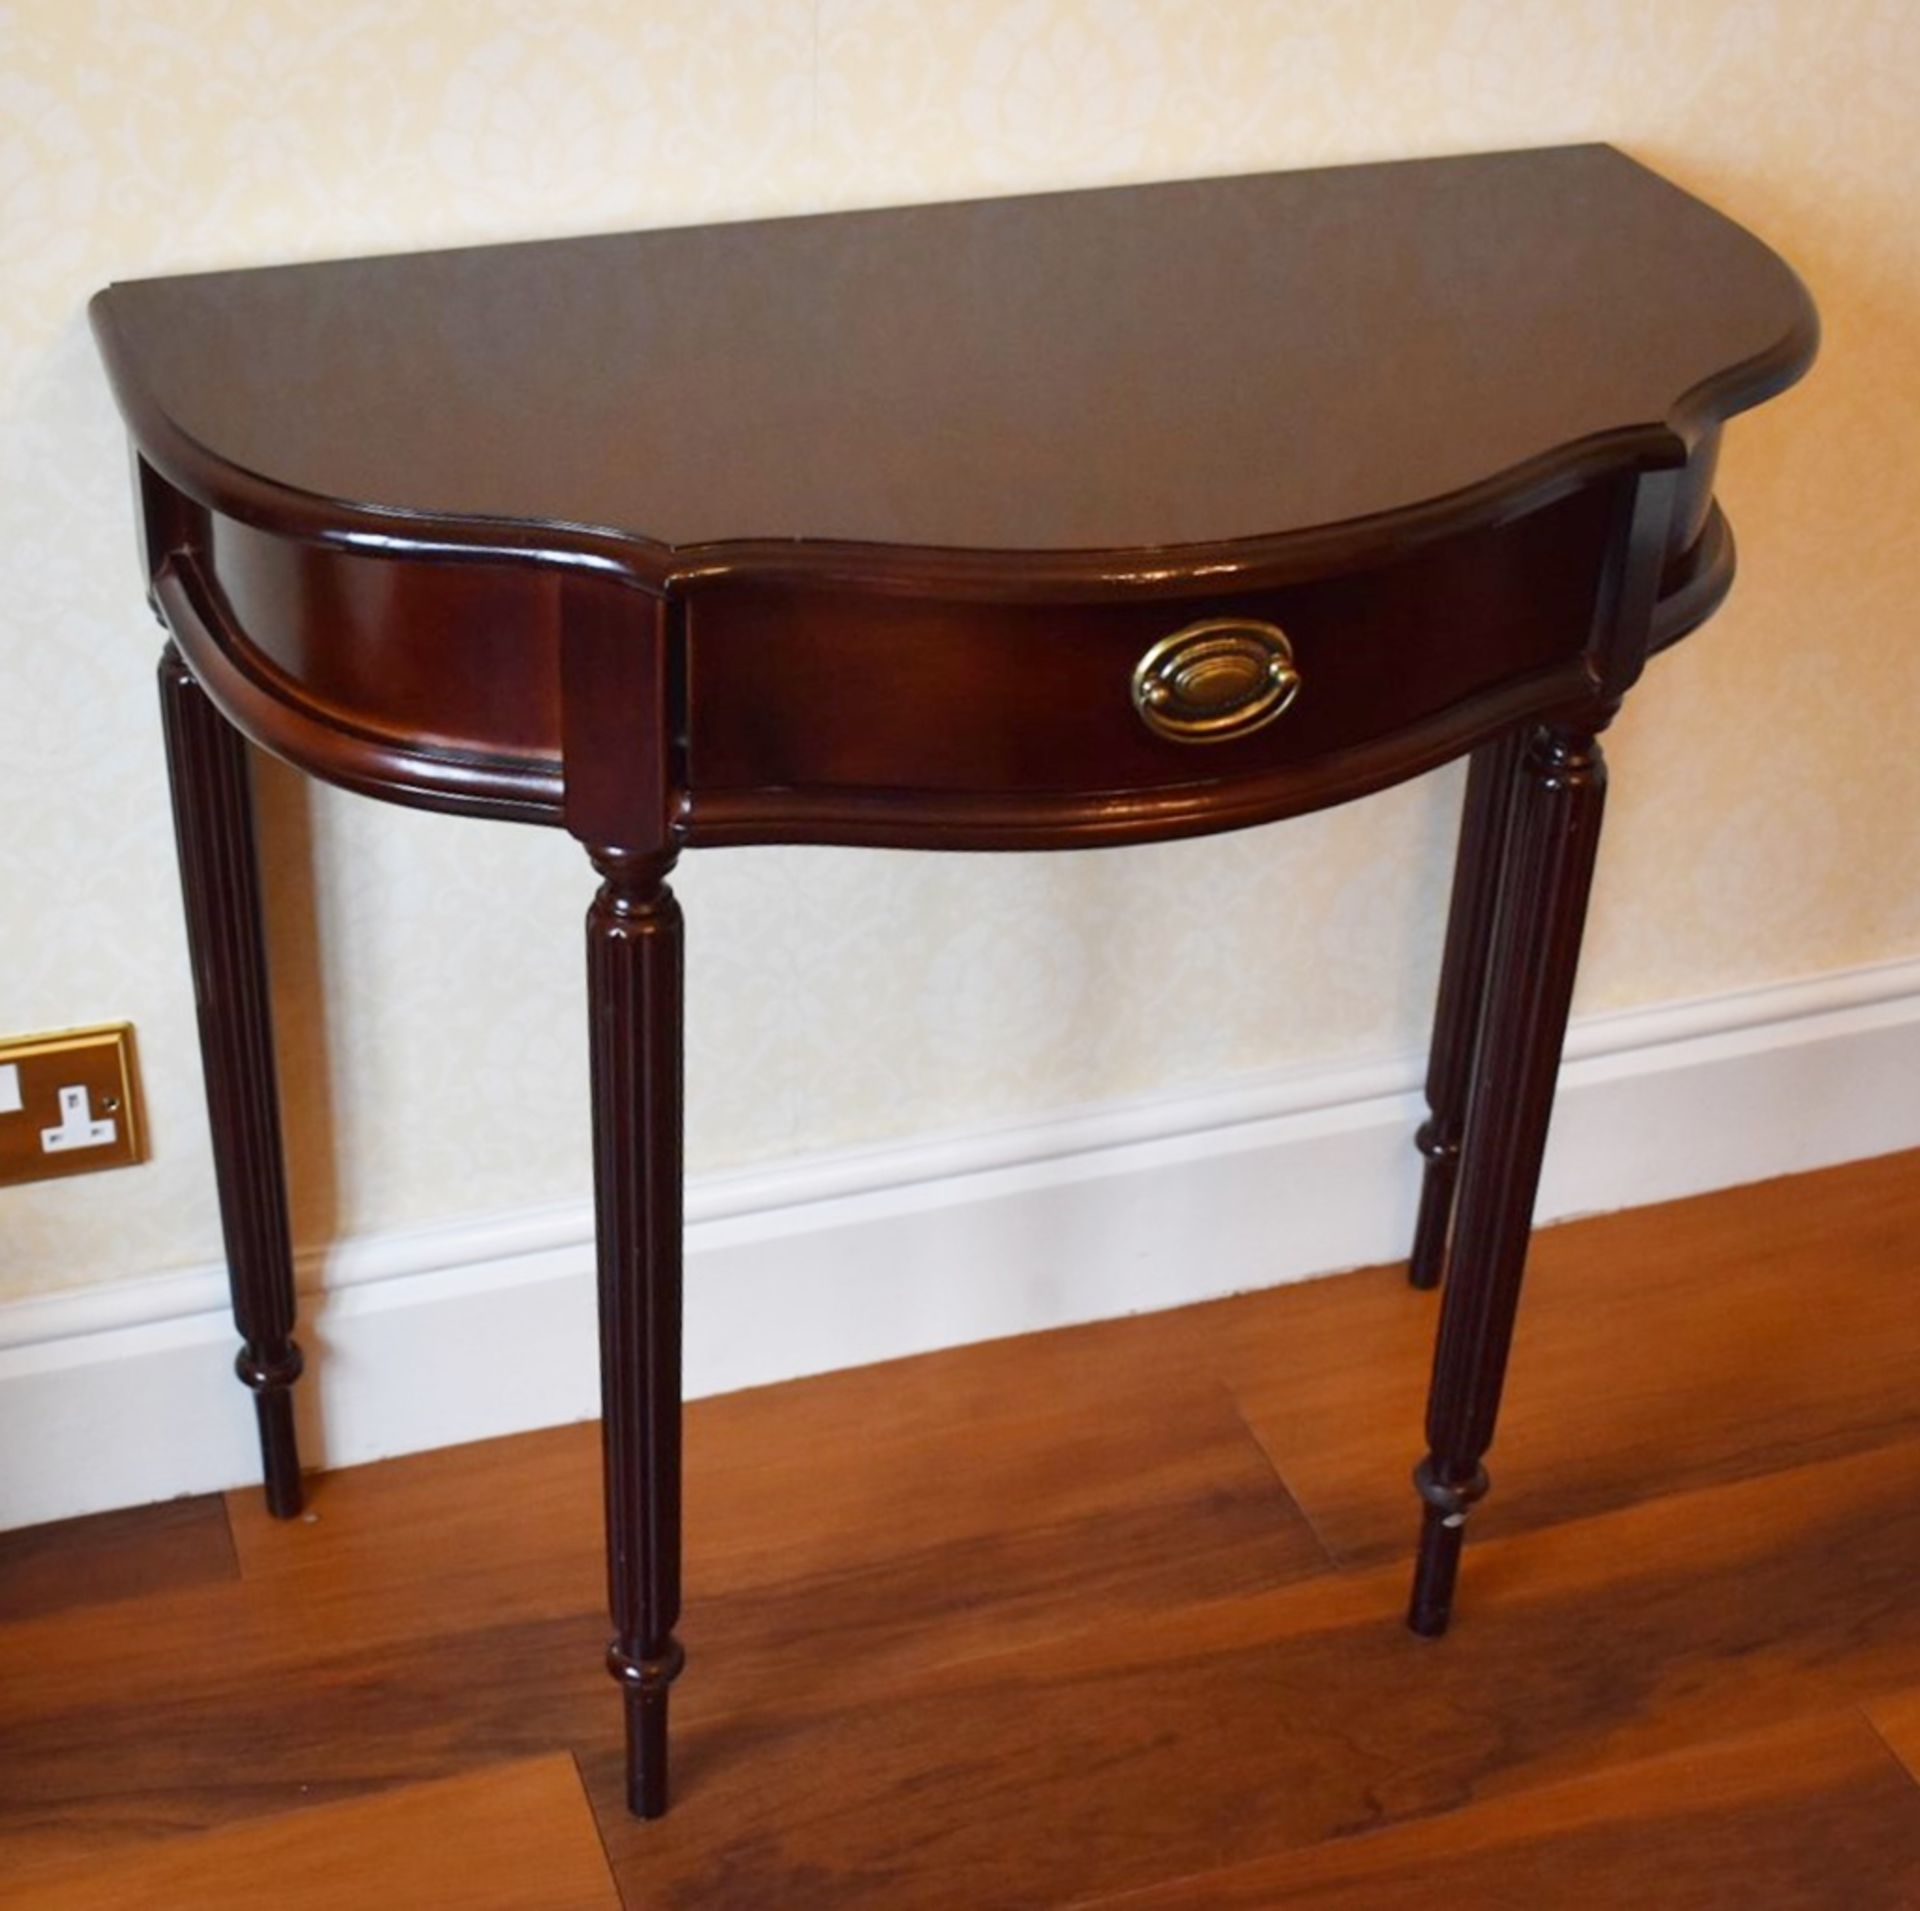 1 x Mahogany Half Moon Console Table With Brass Hardware and Single Drawer - Dimensions: H74 x W81 x - Image 4 of 4